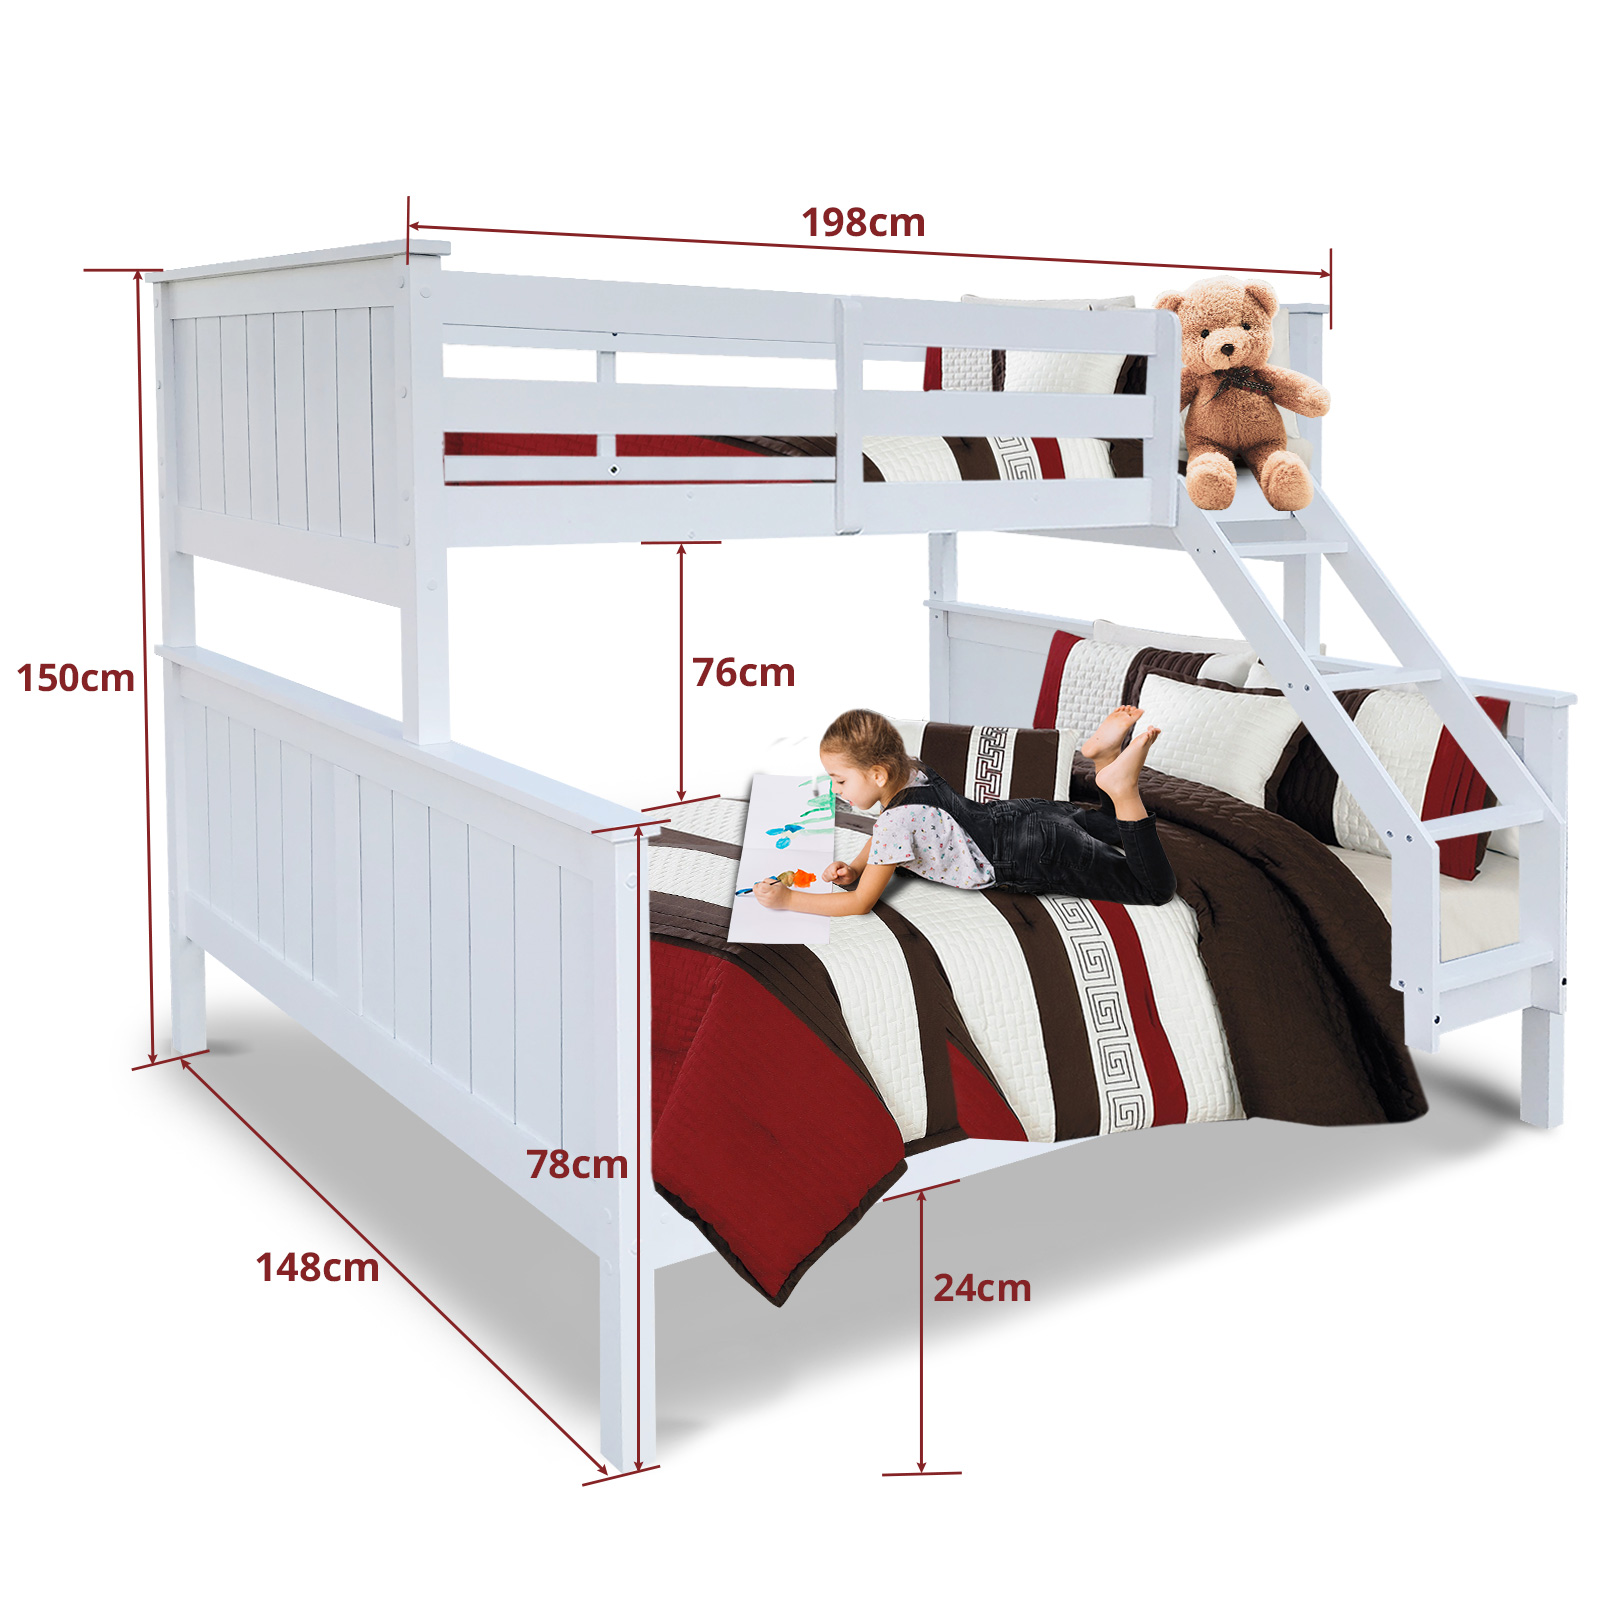 bunk beds for children